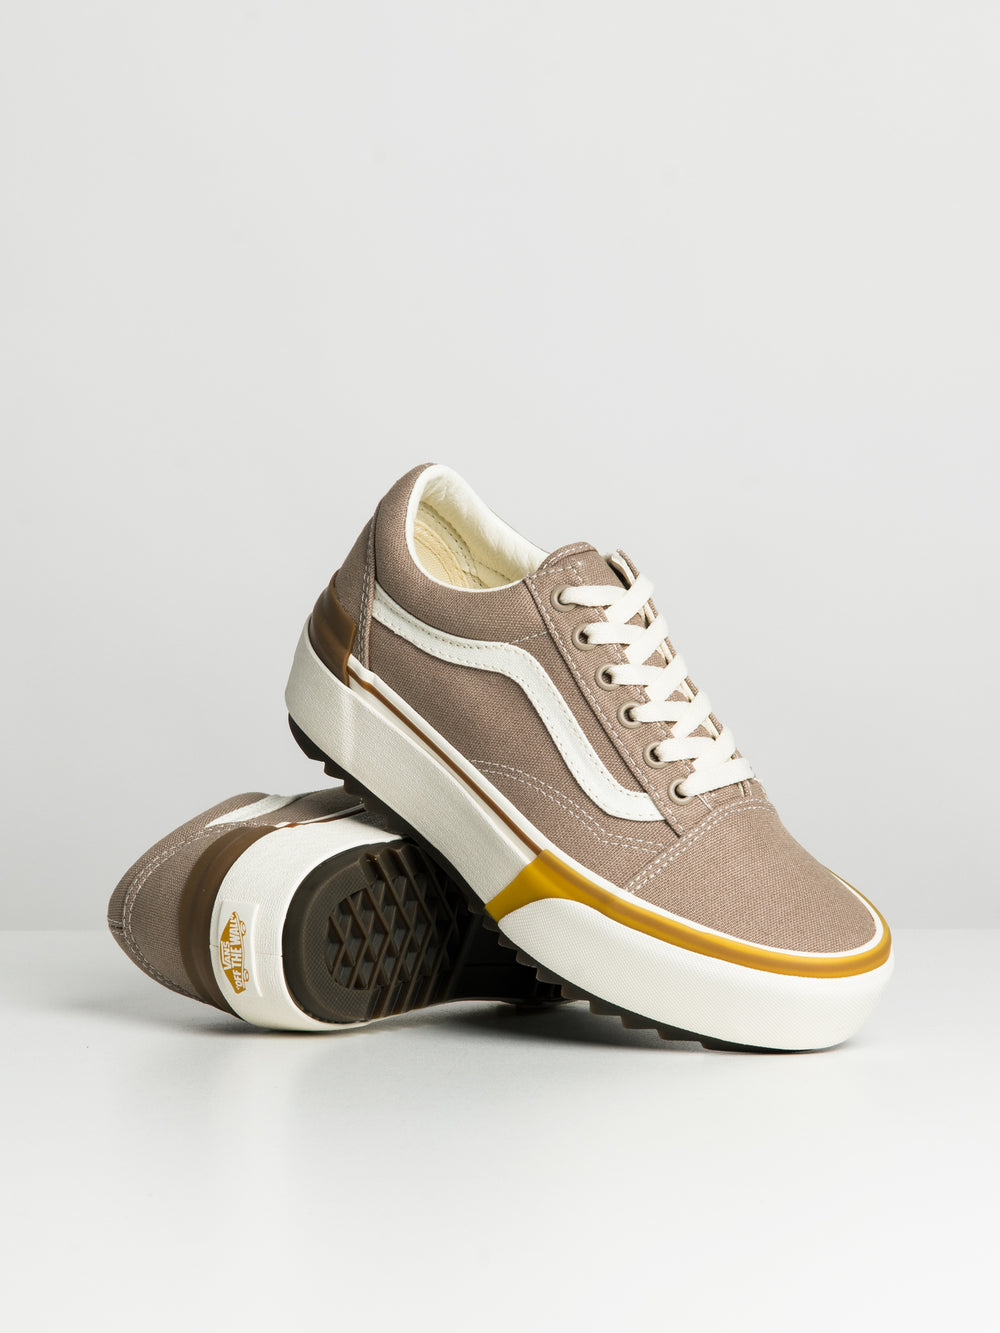 WOMENS VANS OLD SKOOL STACKED CANVAS - CLEARANCE